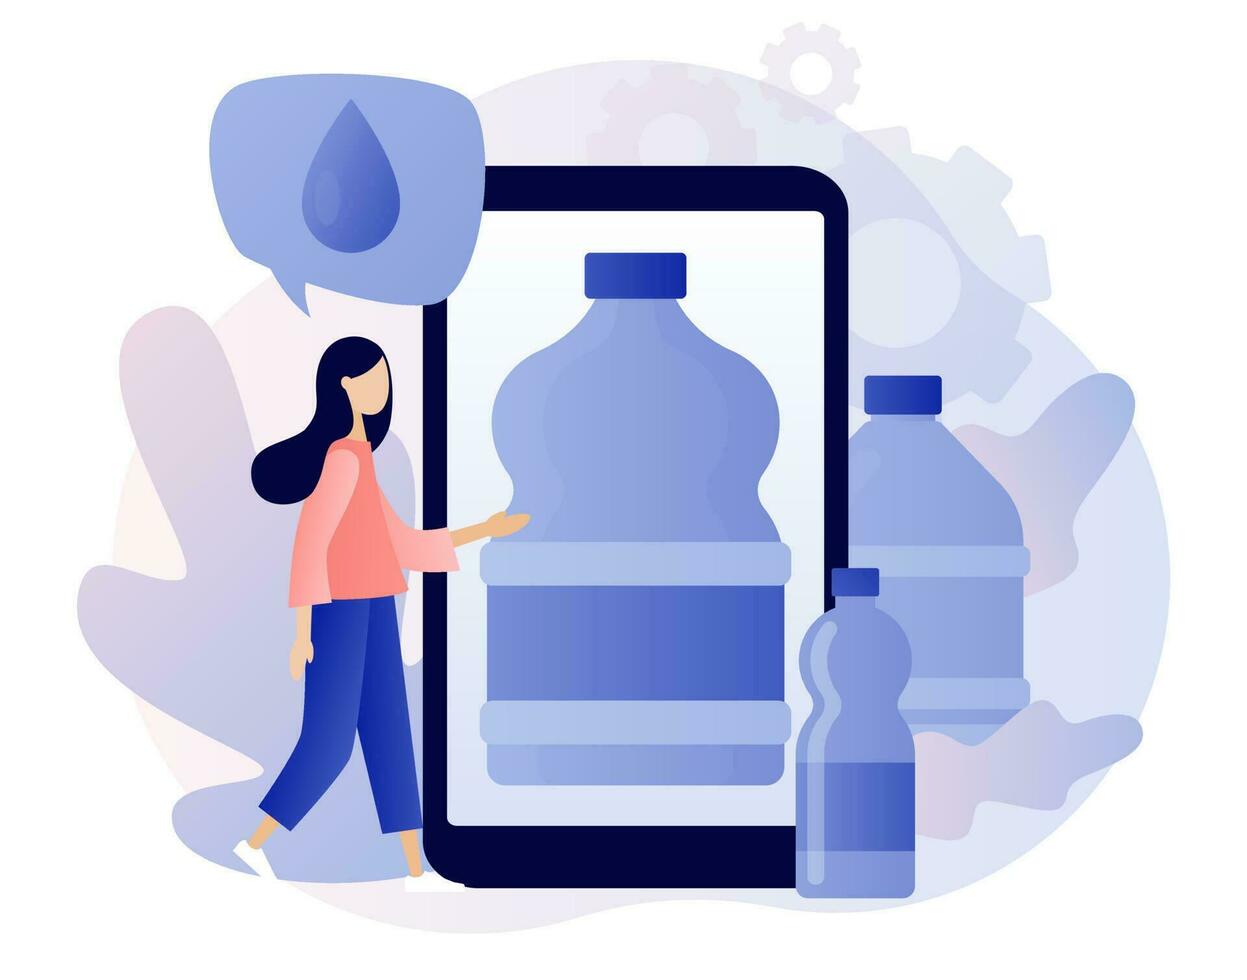 Water delivery service smartphone app. Bottles with clean water. Supply, shipping. Modern flat cartoon style. Vector illustration on white background